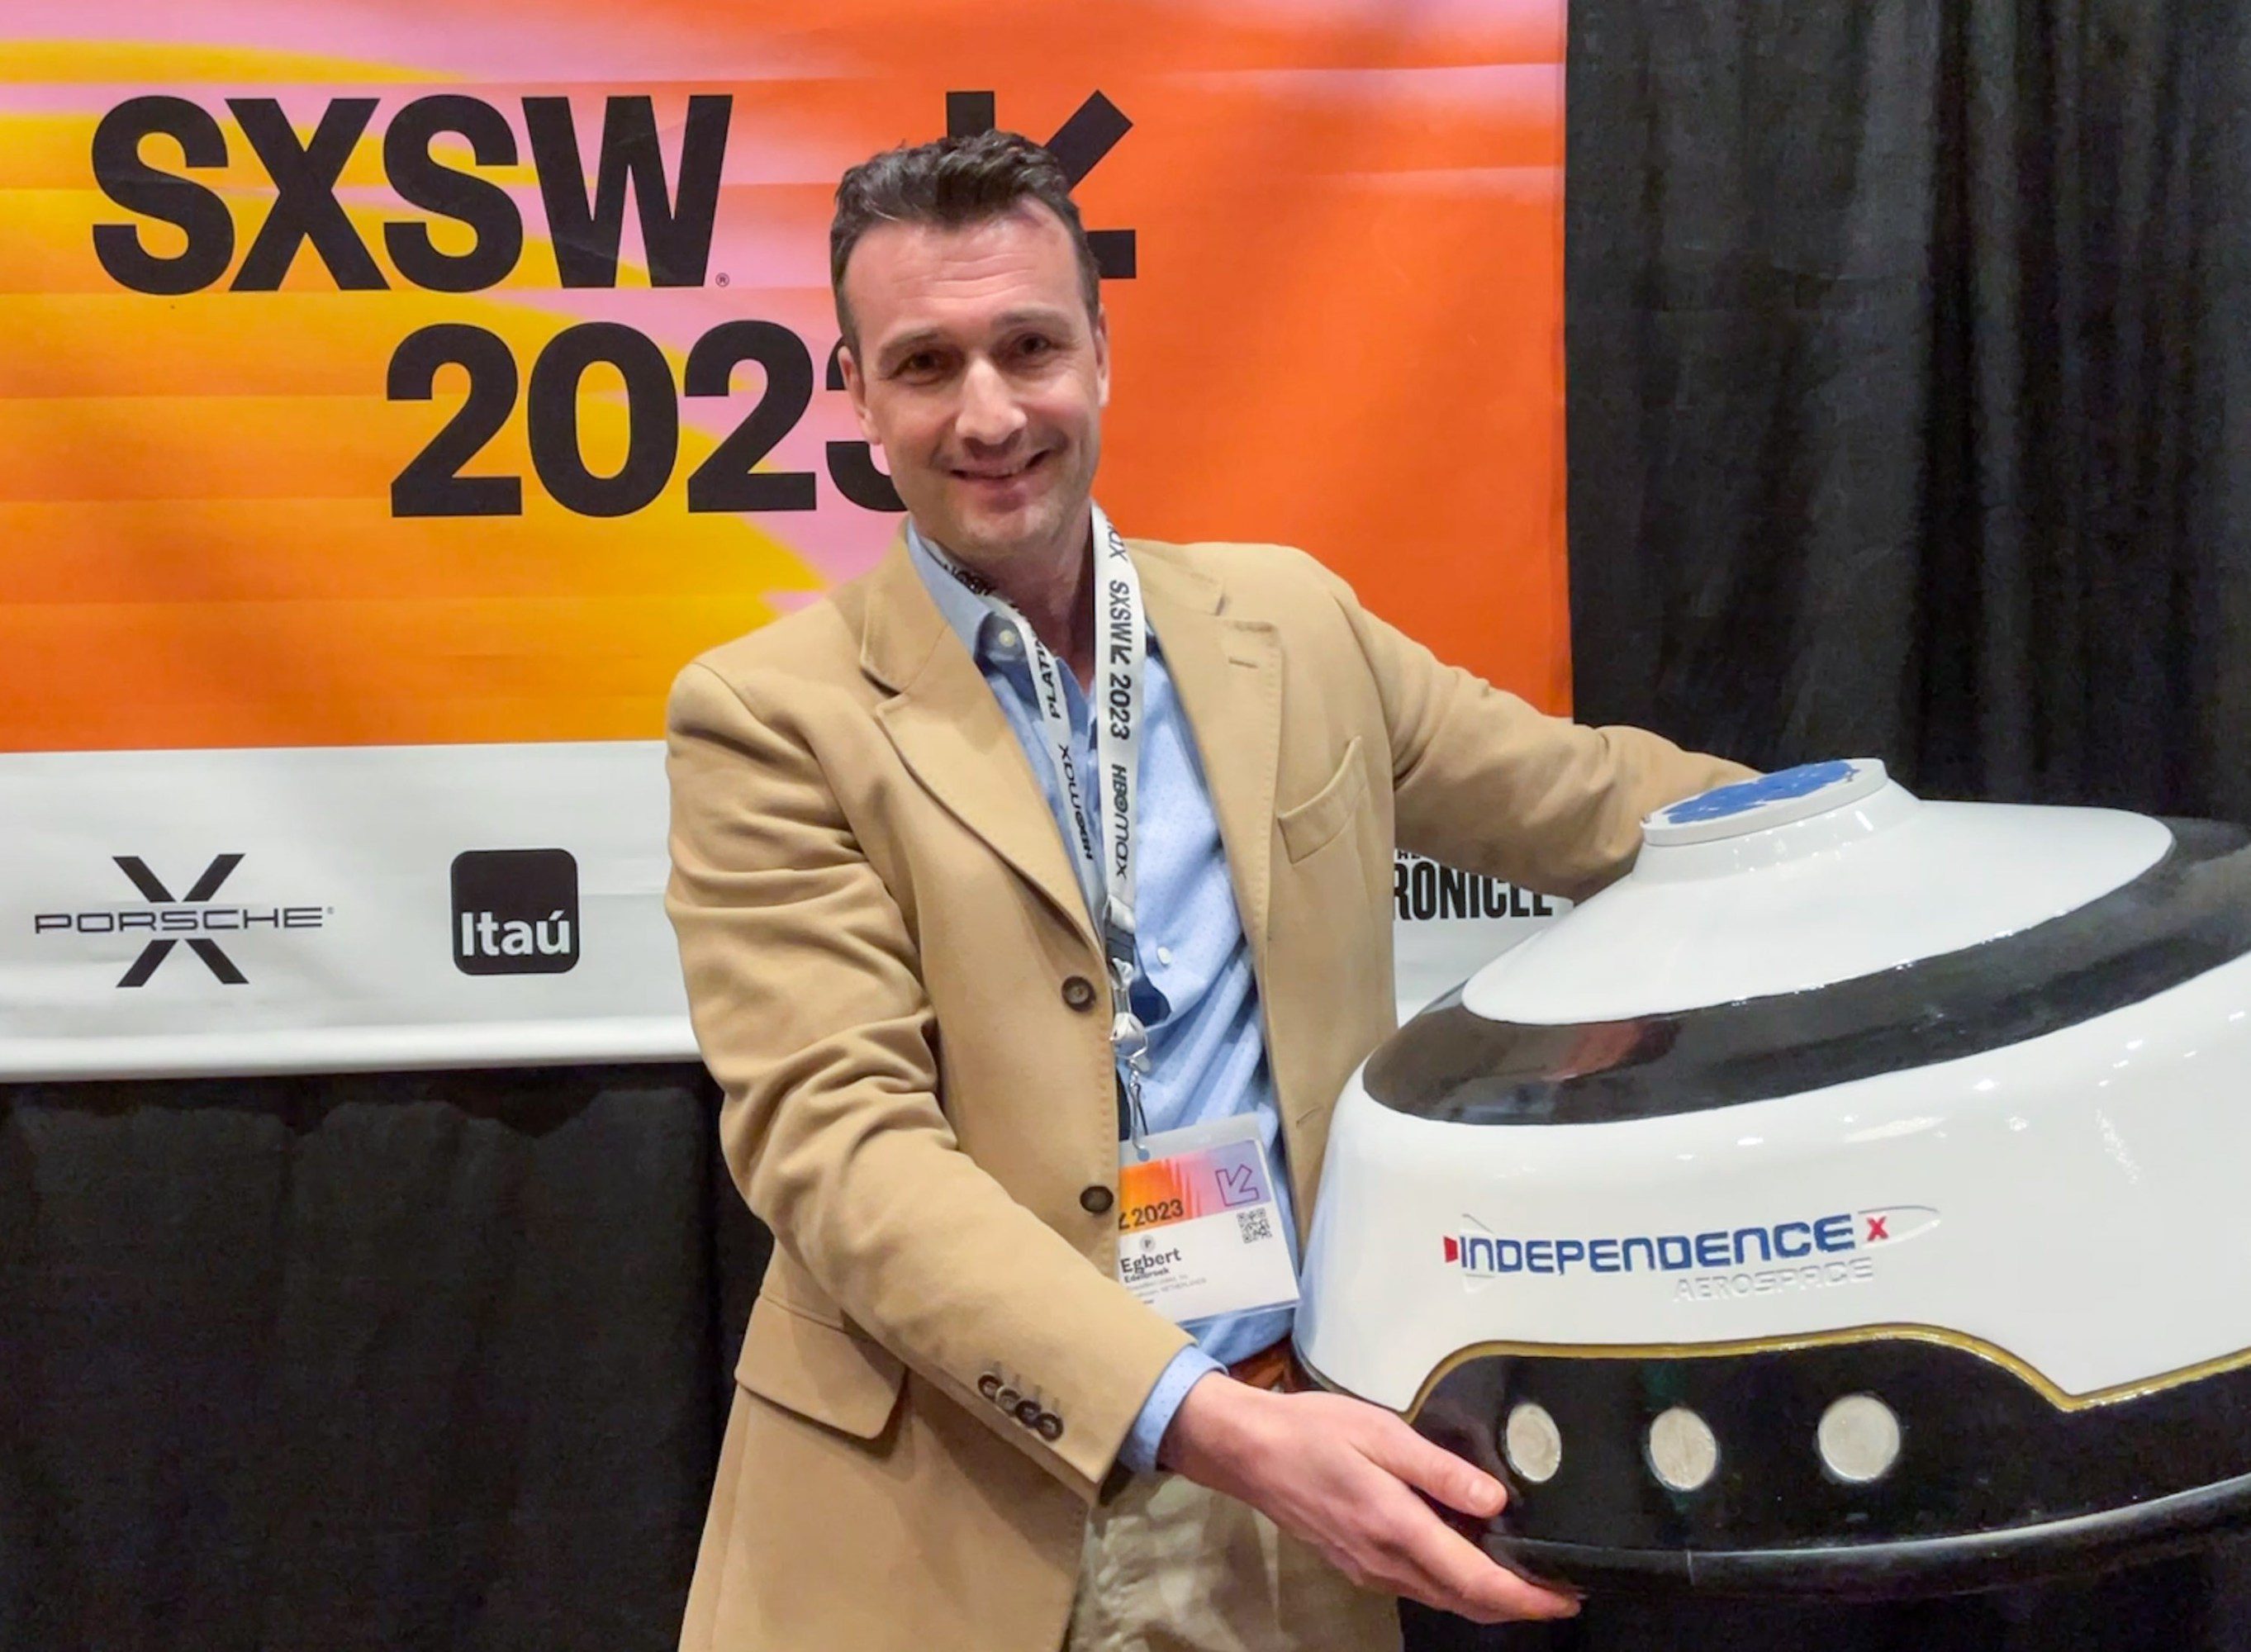 Edelbrook in front of a banner for SXSW holding the Independence Aerospace capsule